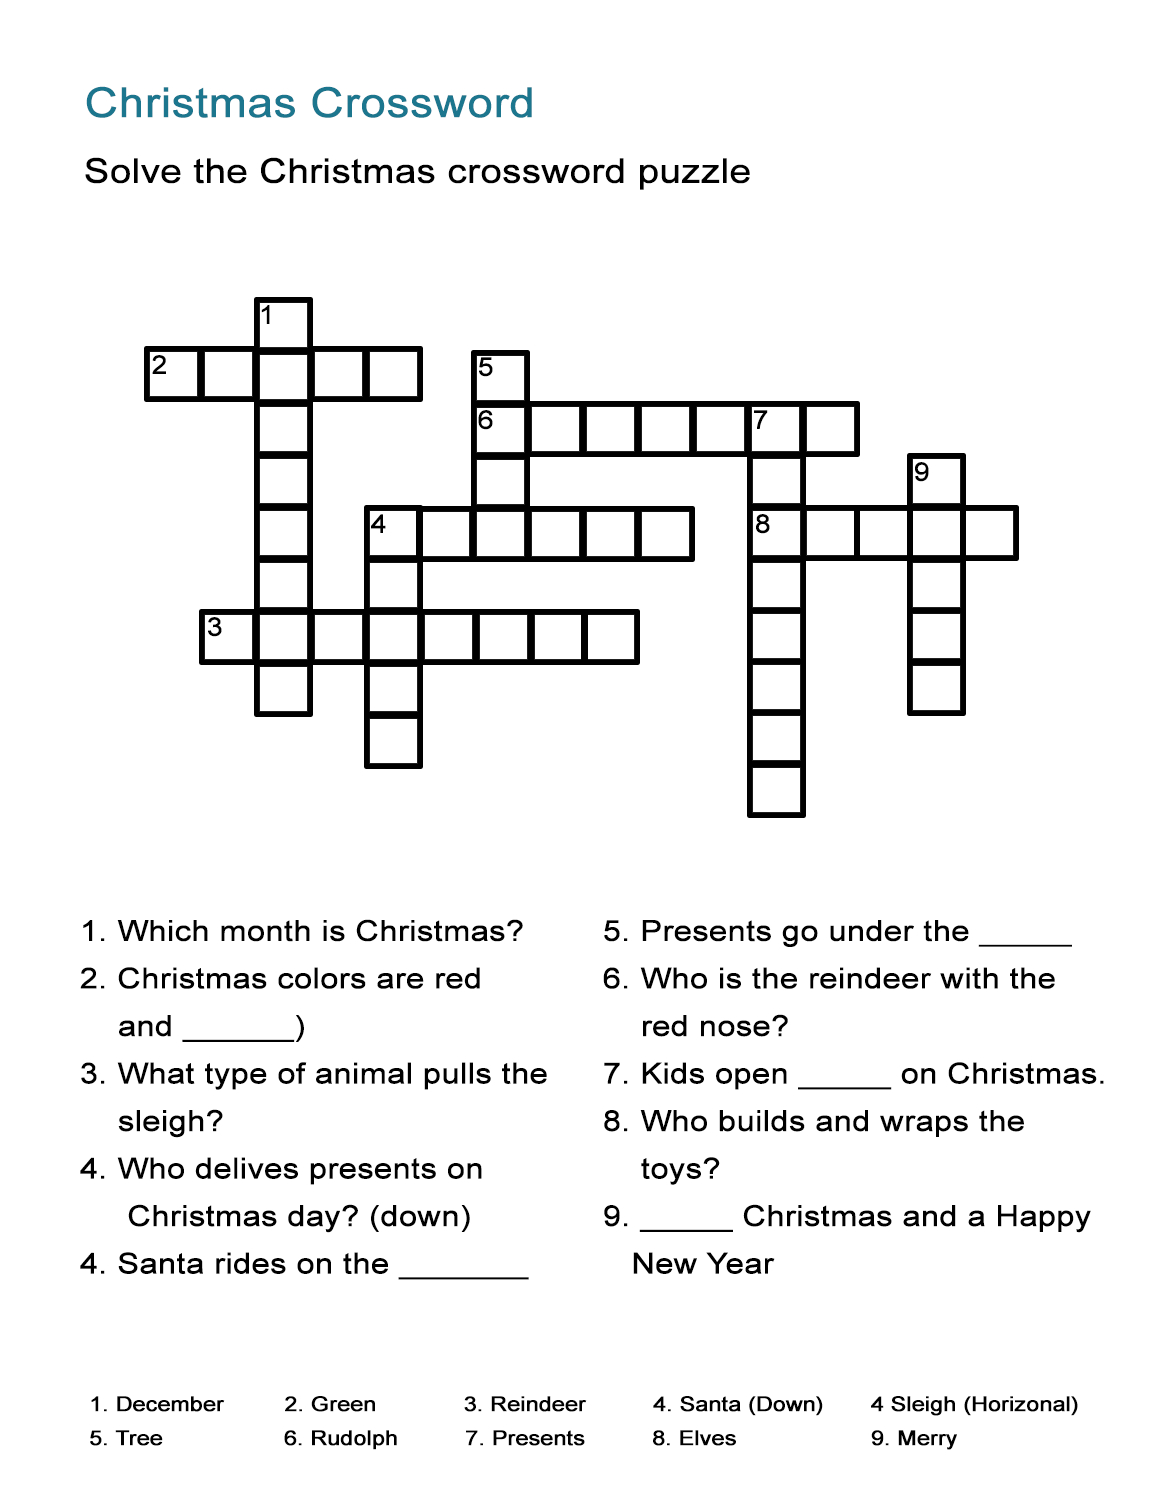 Charger Christmas Crossword Puzzle Answers. Christmas Crossword - Free Printable Christmas Puzzles